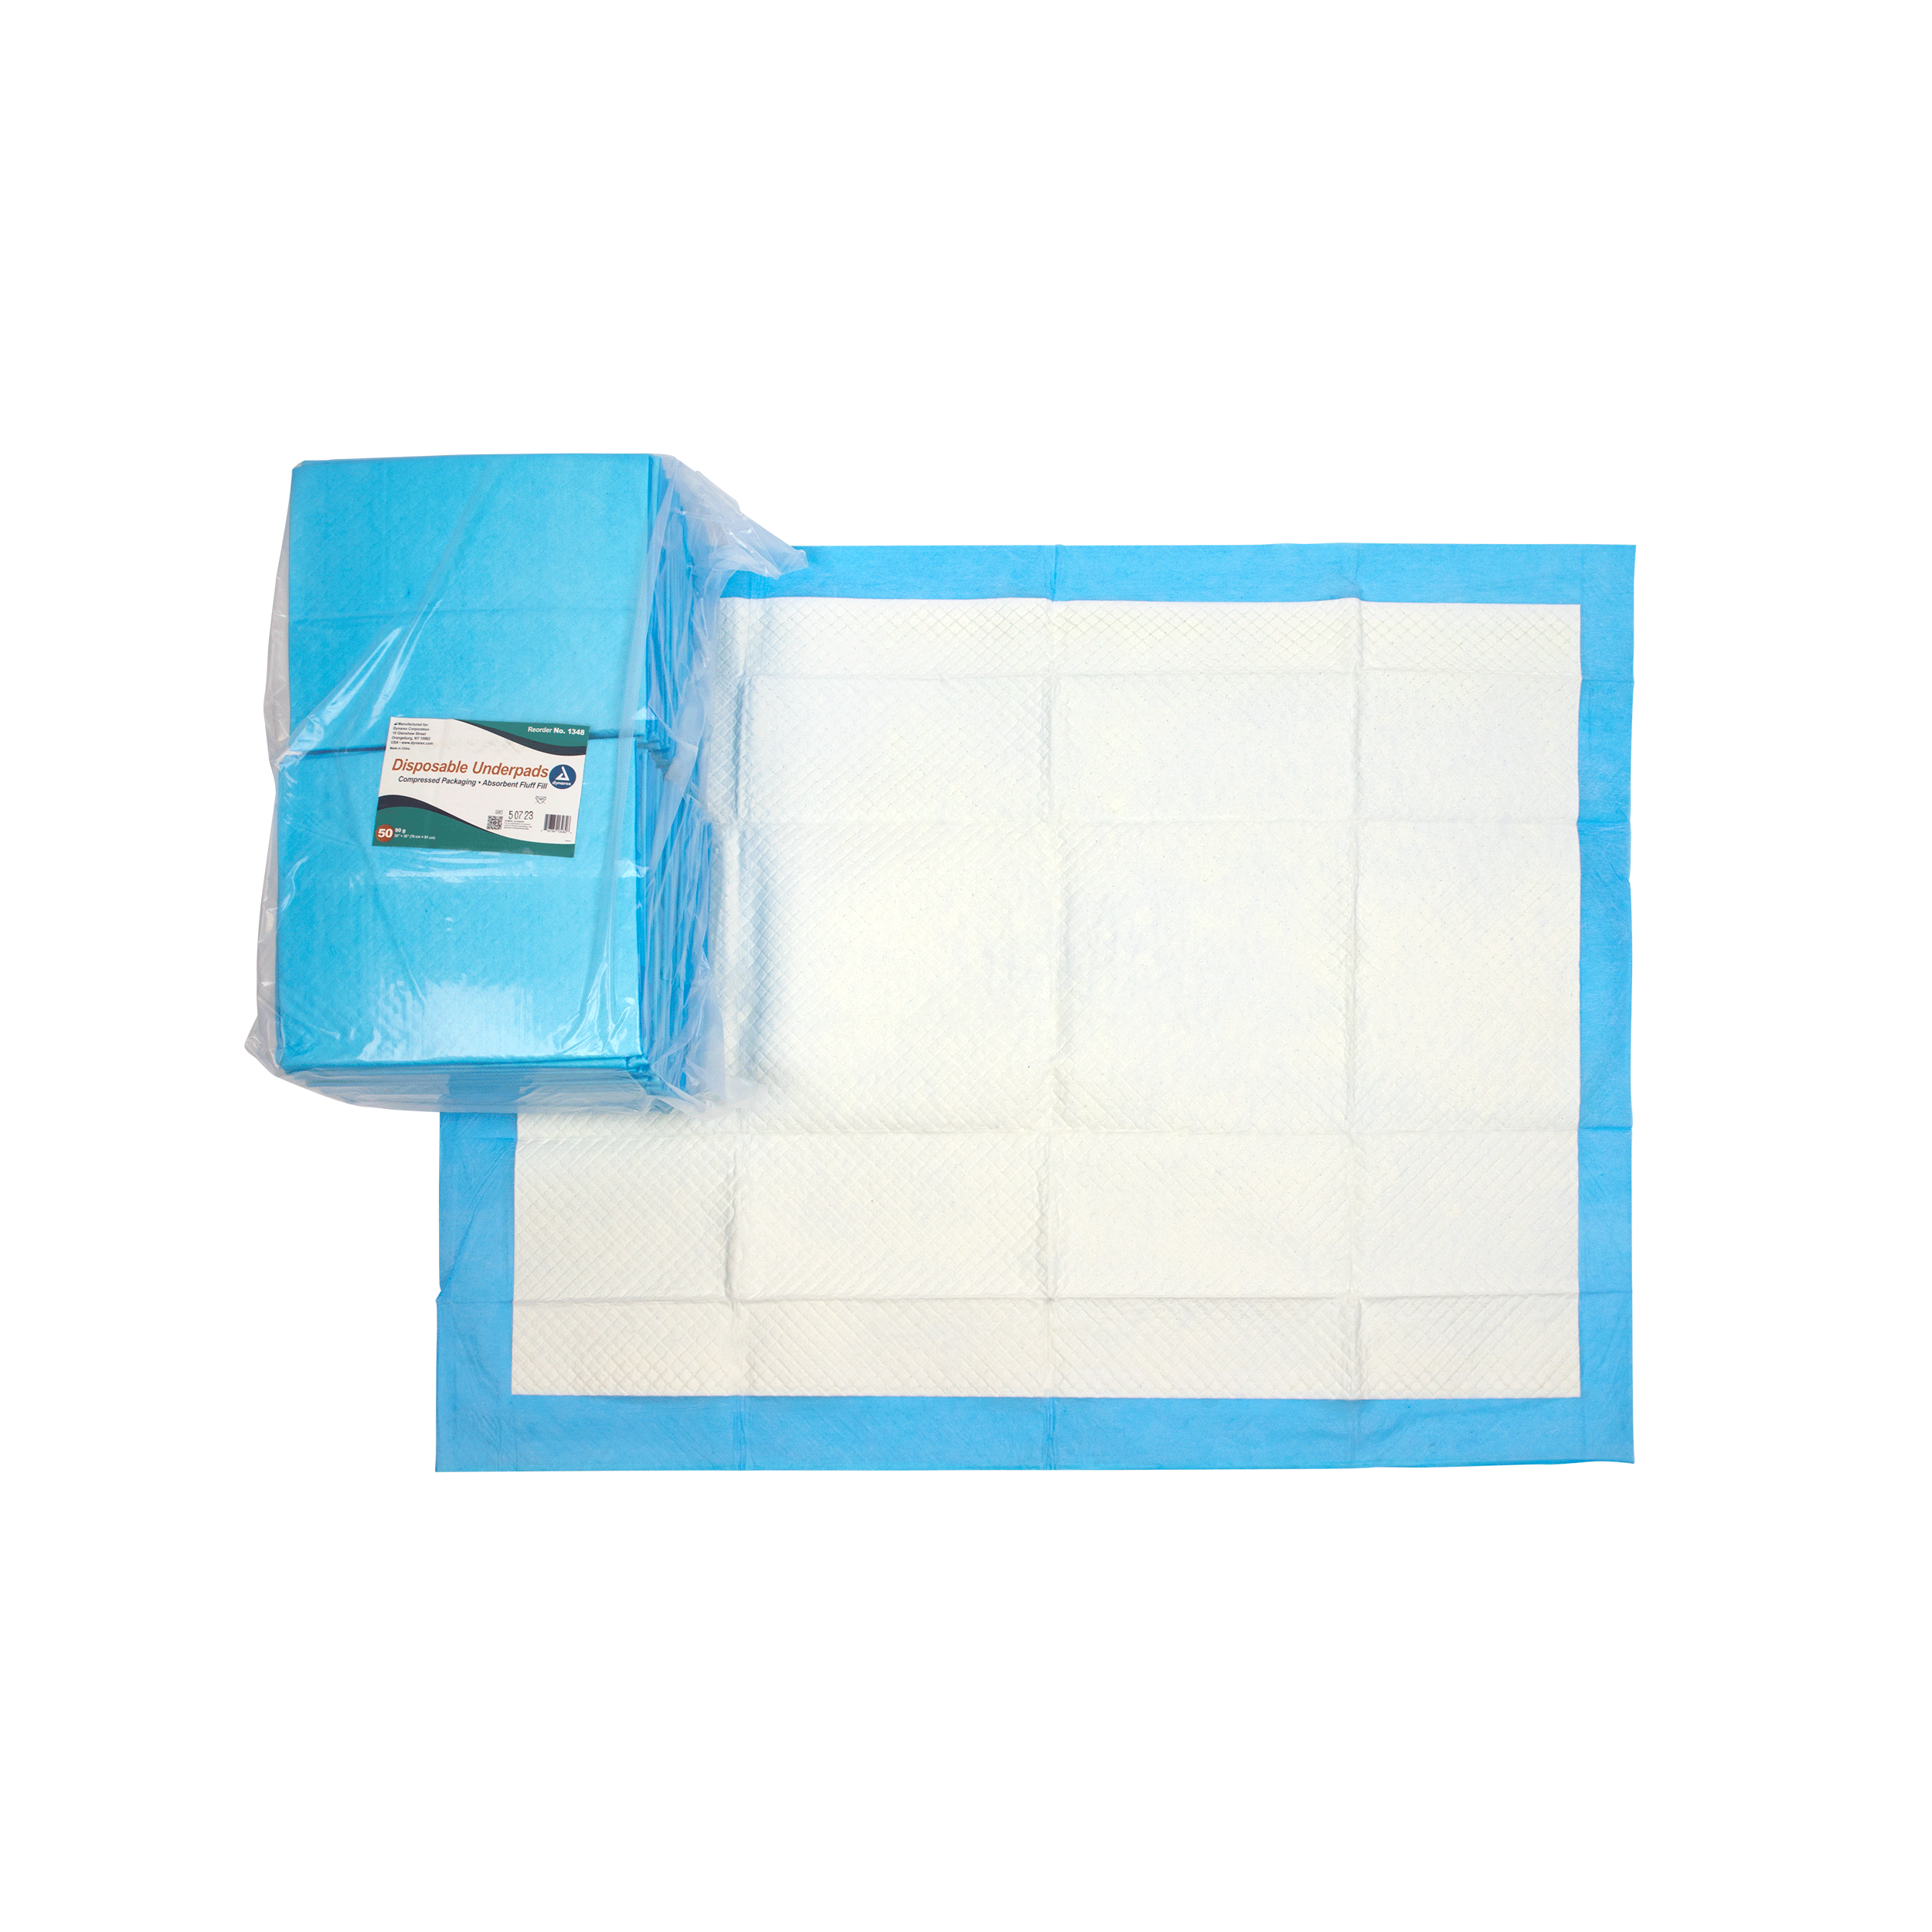 Disposable Underpads, 30 x 36 (90 g) with Polymer